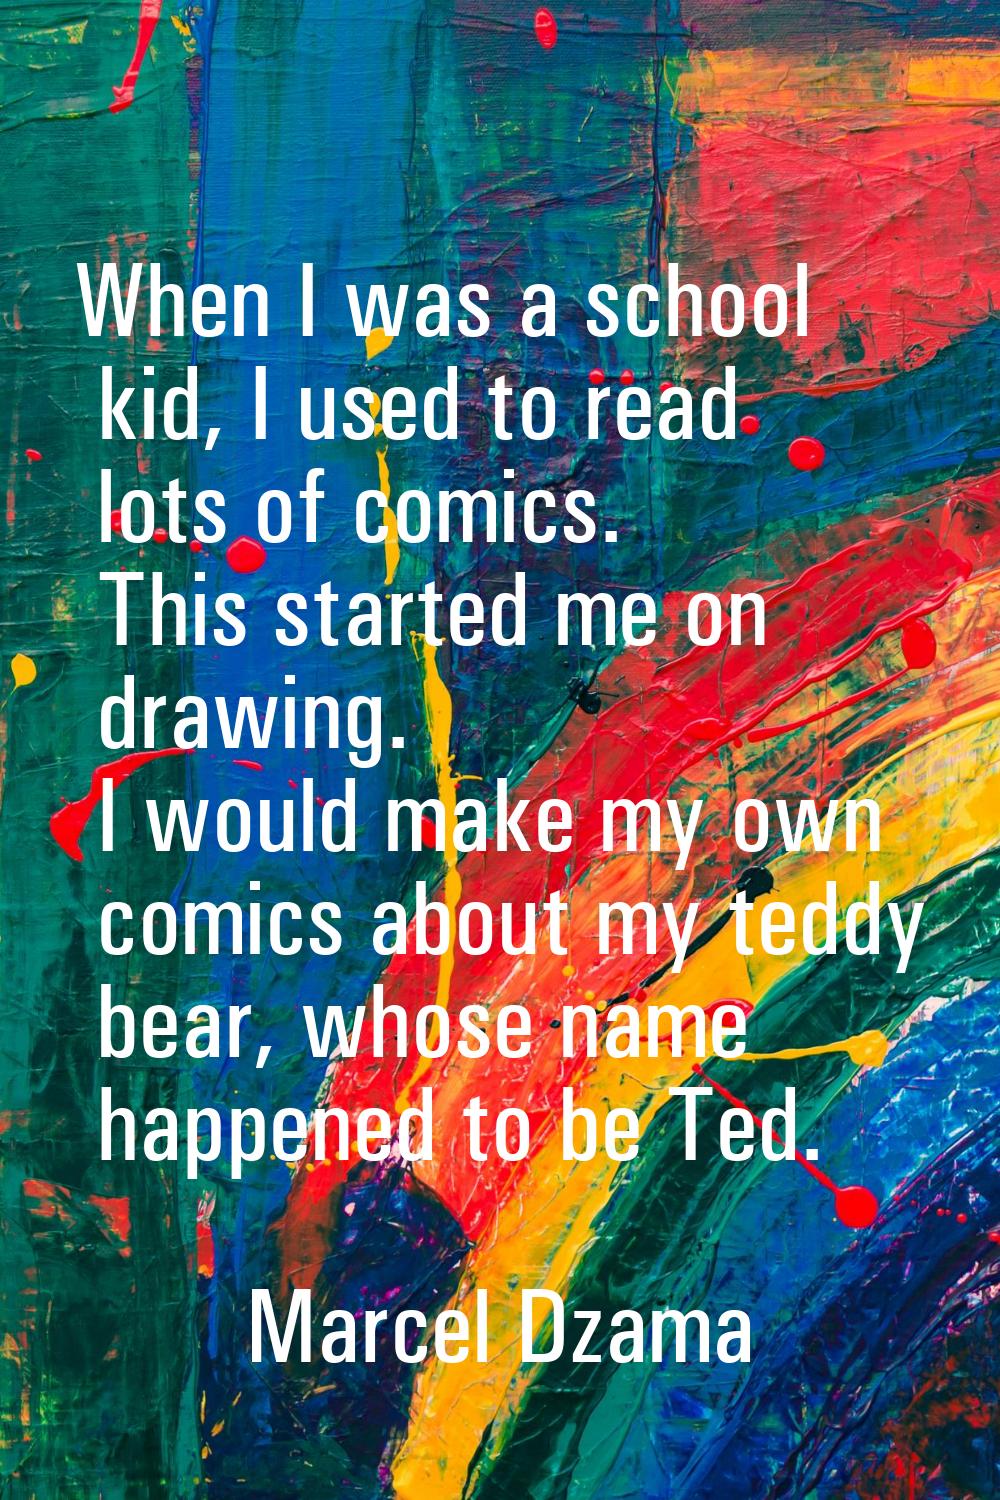 When I was a school kid, I used to read lots of comics. This started me on drawing. I would make my